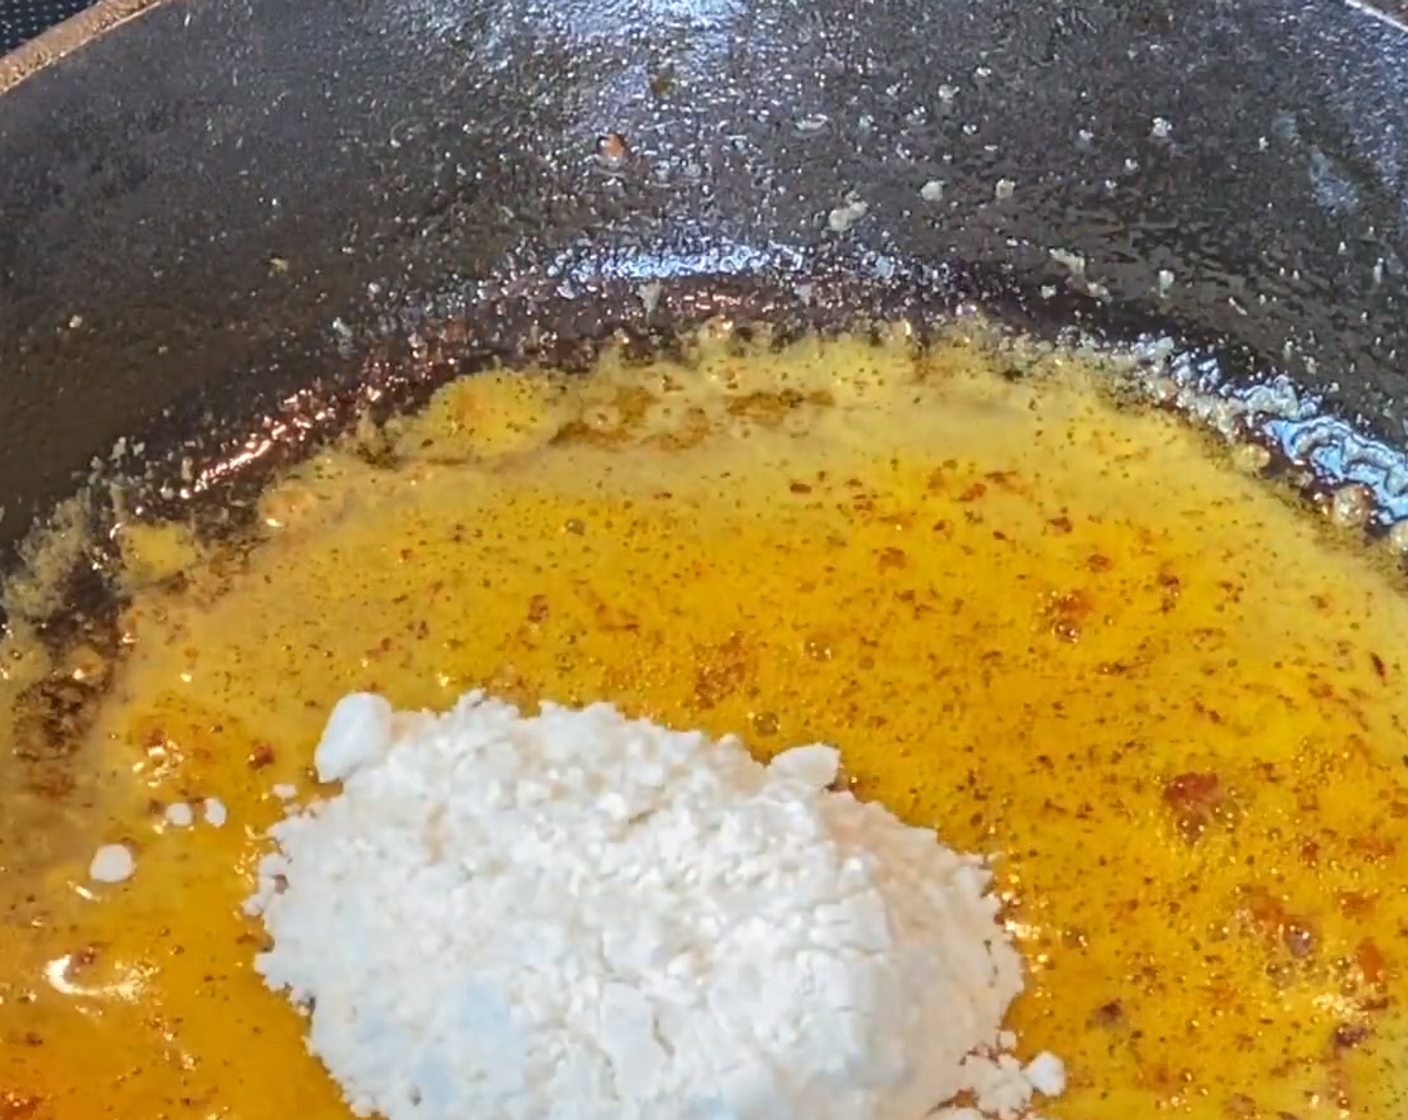 step 4 In the same skillet, melt the Unsalted Butter (1 Tbsp) over medium heat. Whisk in the All-Purpose Flour (1 Tbsp) and cook for 1 minute.